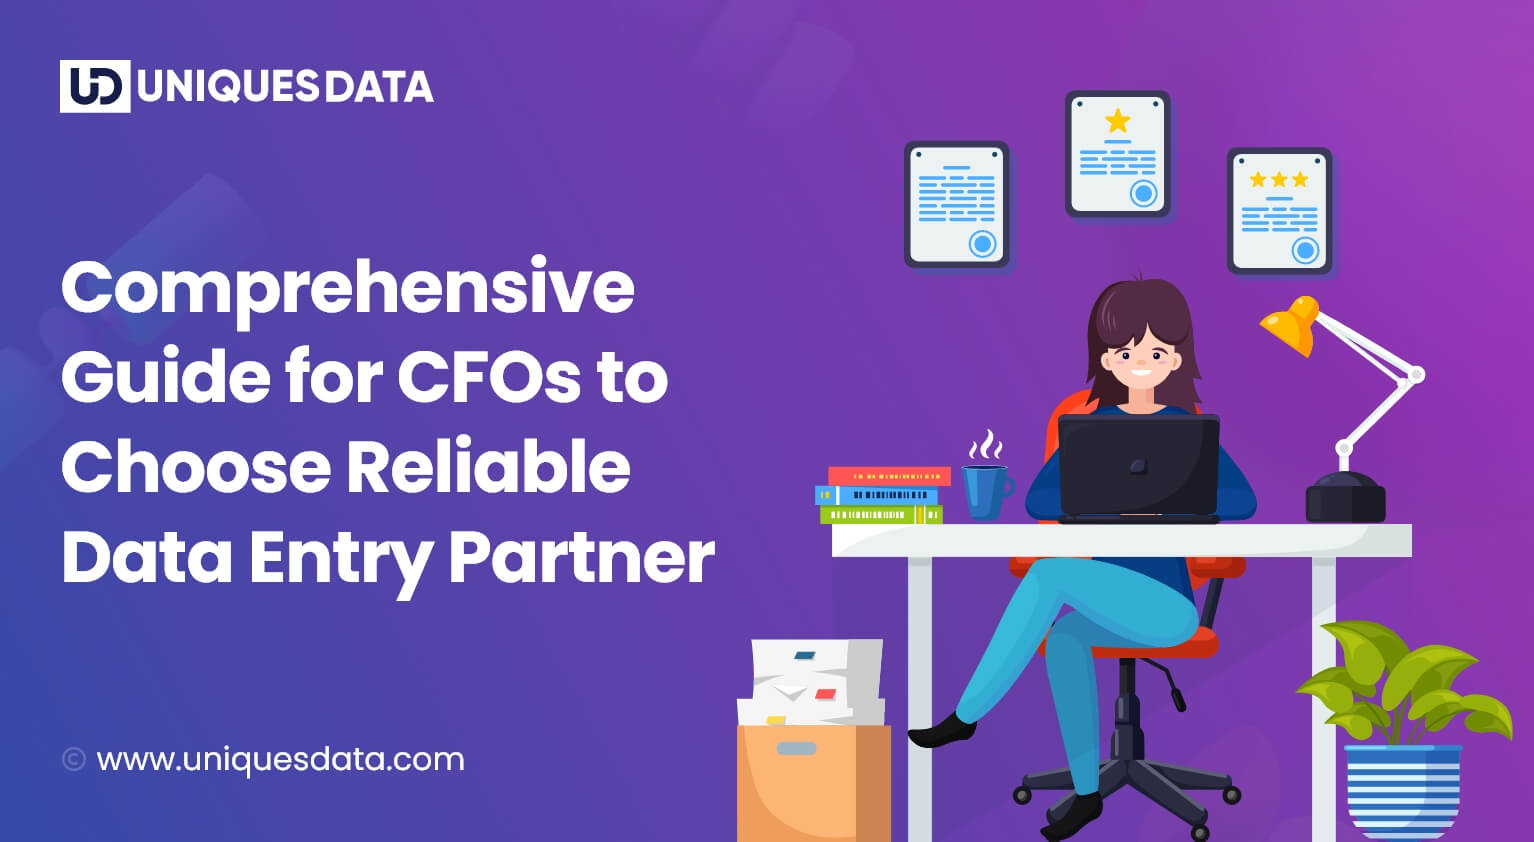 Comprehensive Guide for CFOs to Choose Reliable Data Entry Partner